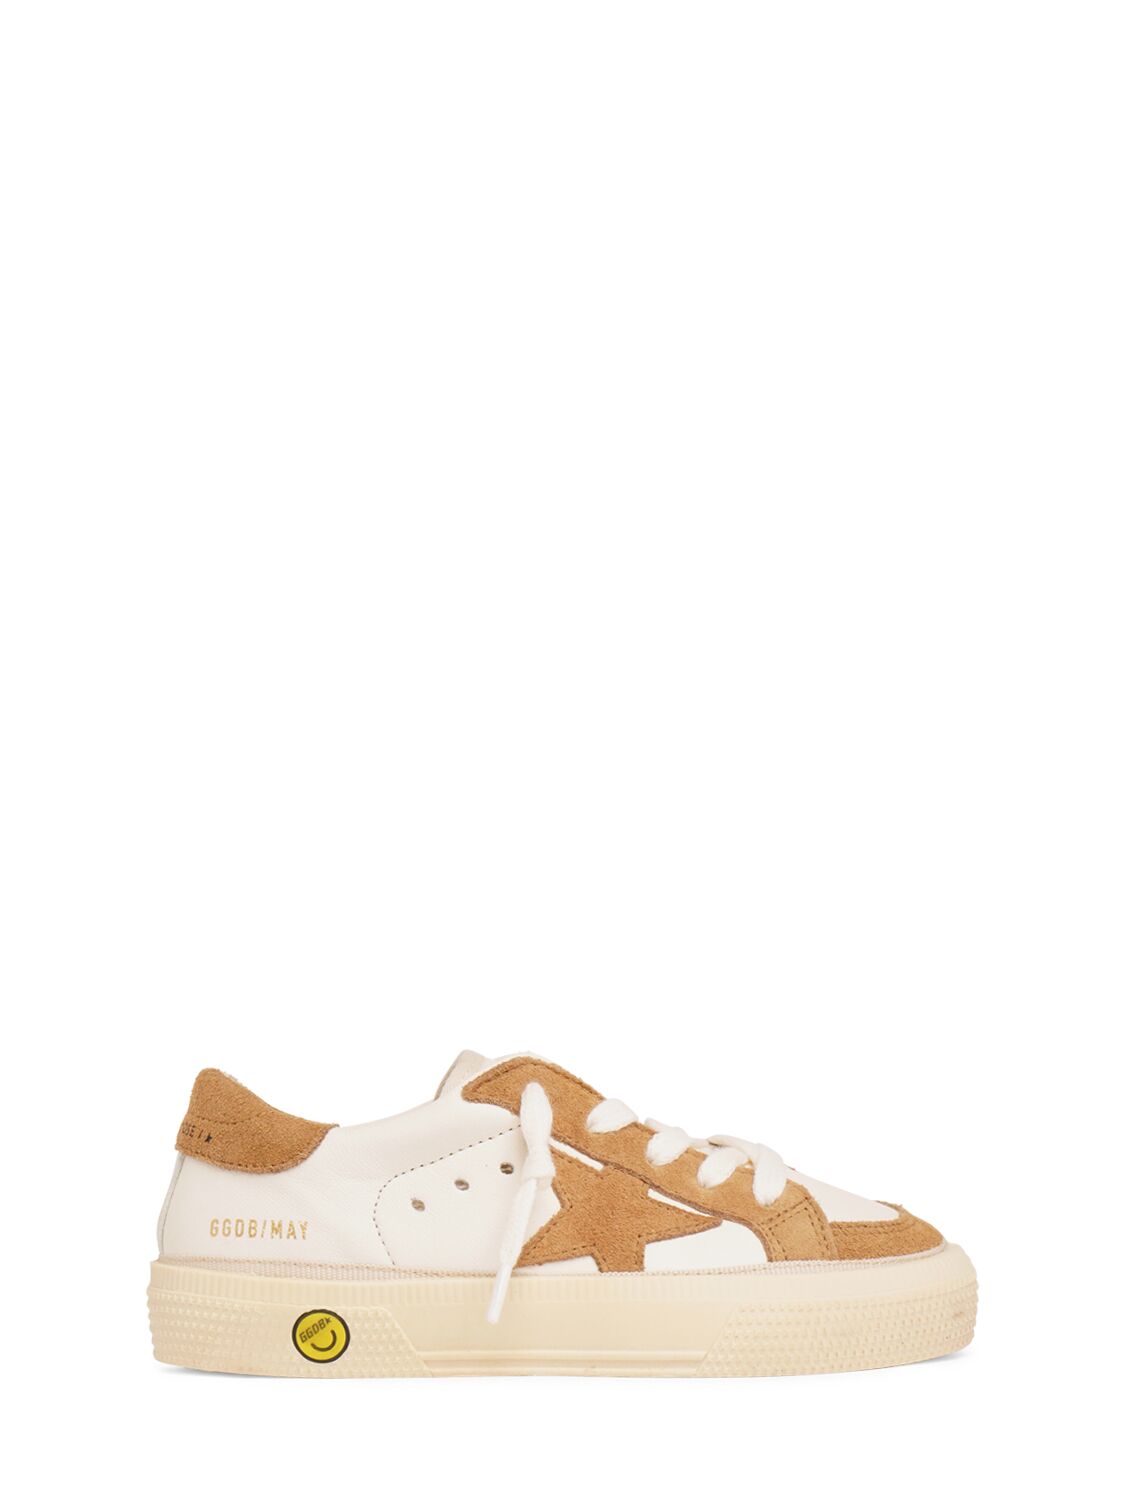 GOLDEN GOOSE MAY LEATHER LACE-UP SNEAKERS